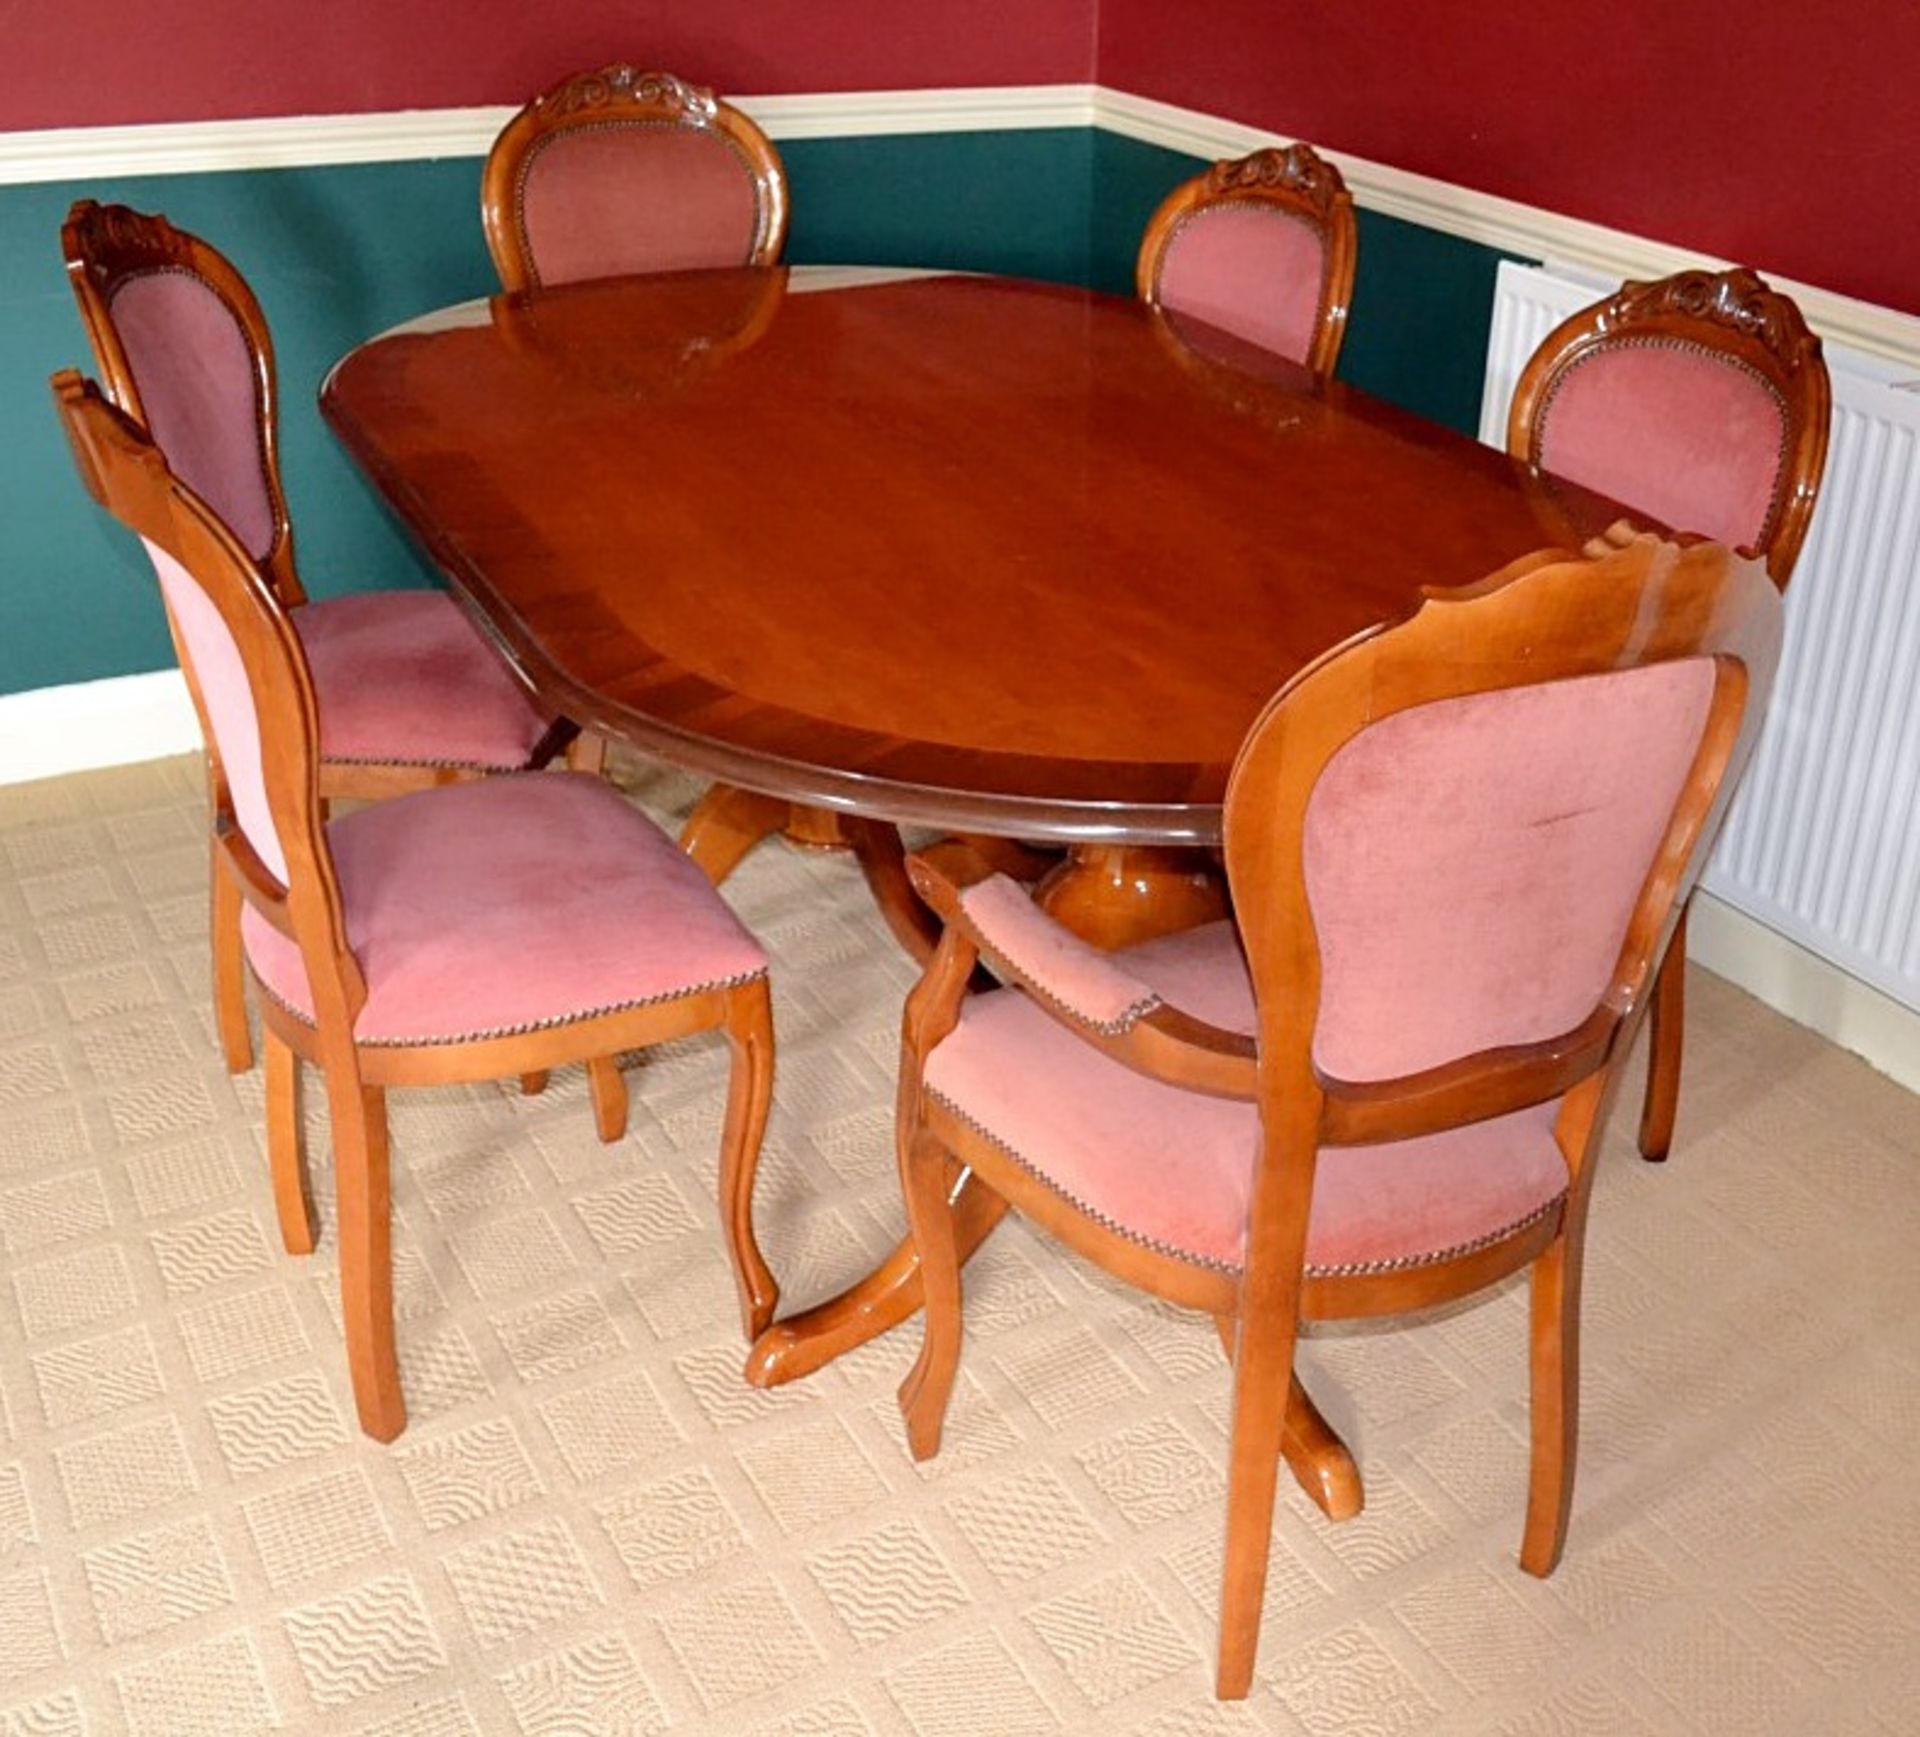 *Just Added* 1 x Large Solid Wood Dining Table With Chairs - From A Grade II Listed Hall In Very